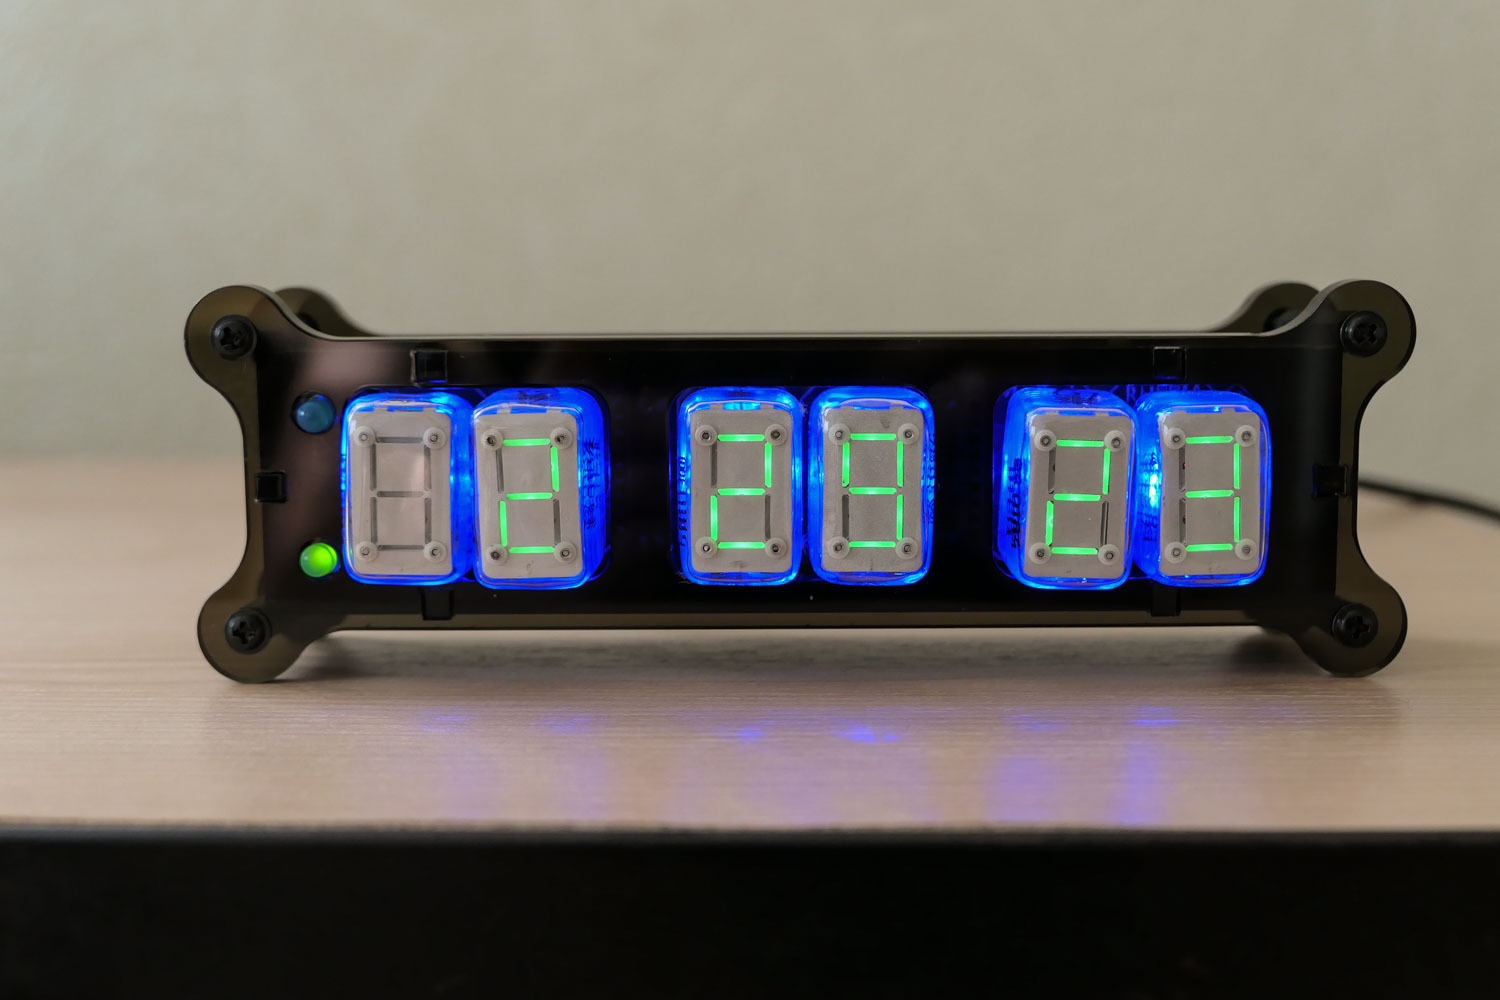 Wi-Fi Thyratron desk clock with ITS1-A tubes in acrylic case